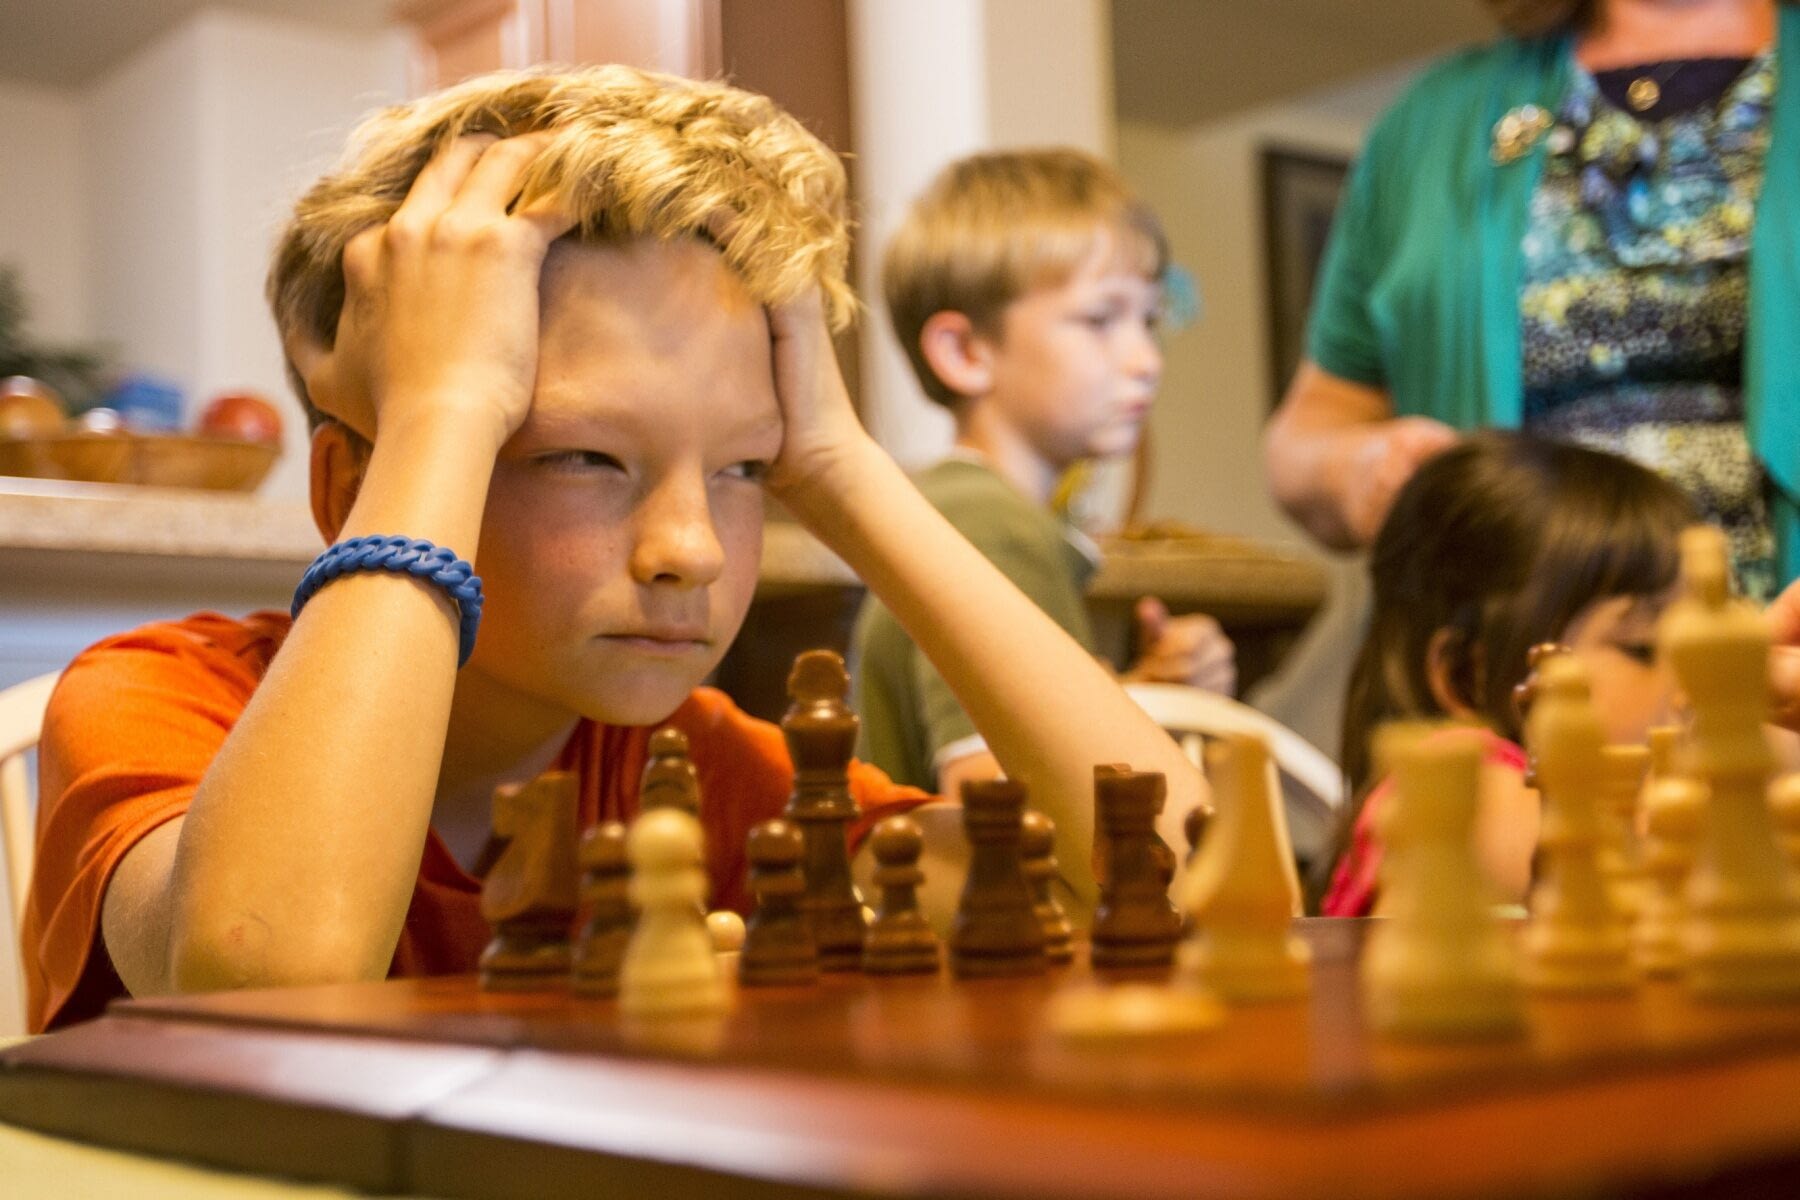 Image: young chess champion concentrates intently on a game of chess with his head resting on his hands